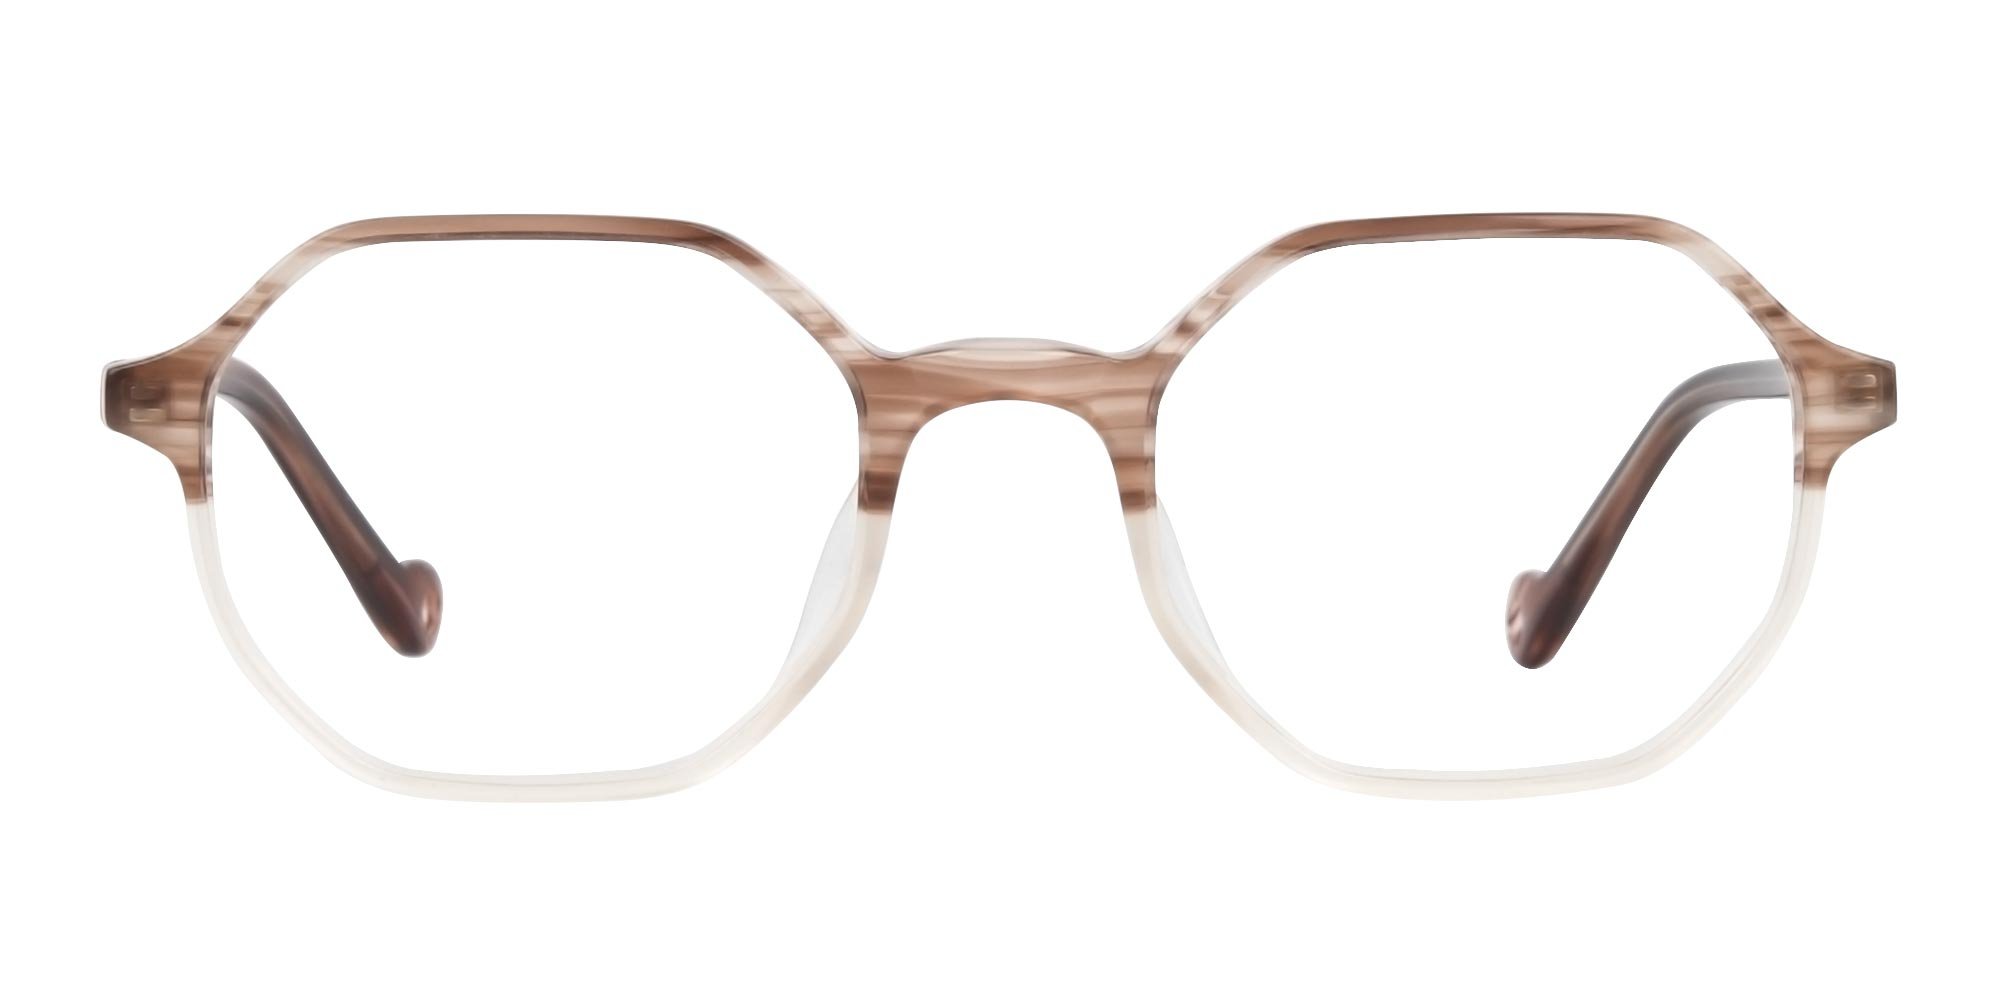 Stripe Brown and Nude Octagonal Glasses trends 2020